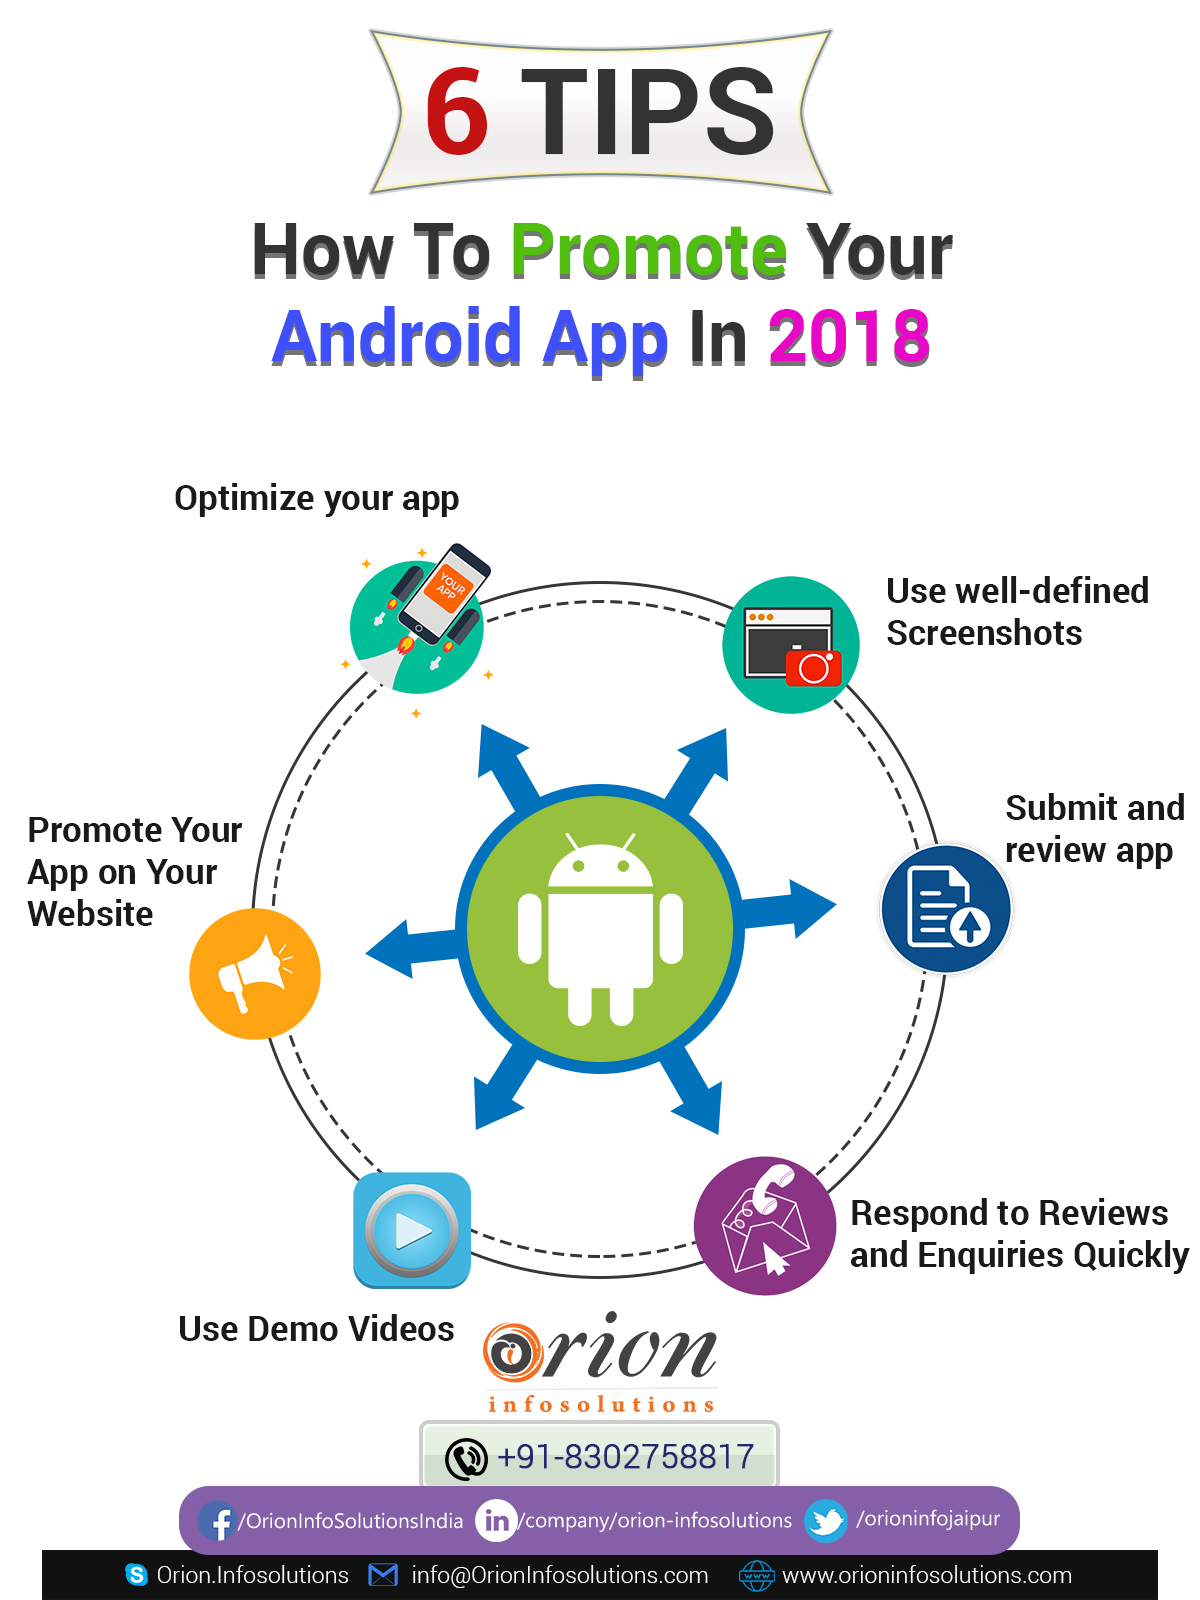 6 TIPS HOW TO PROMOTE YOUR ANDROID APP CONSTANTLY